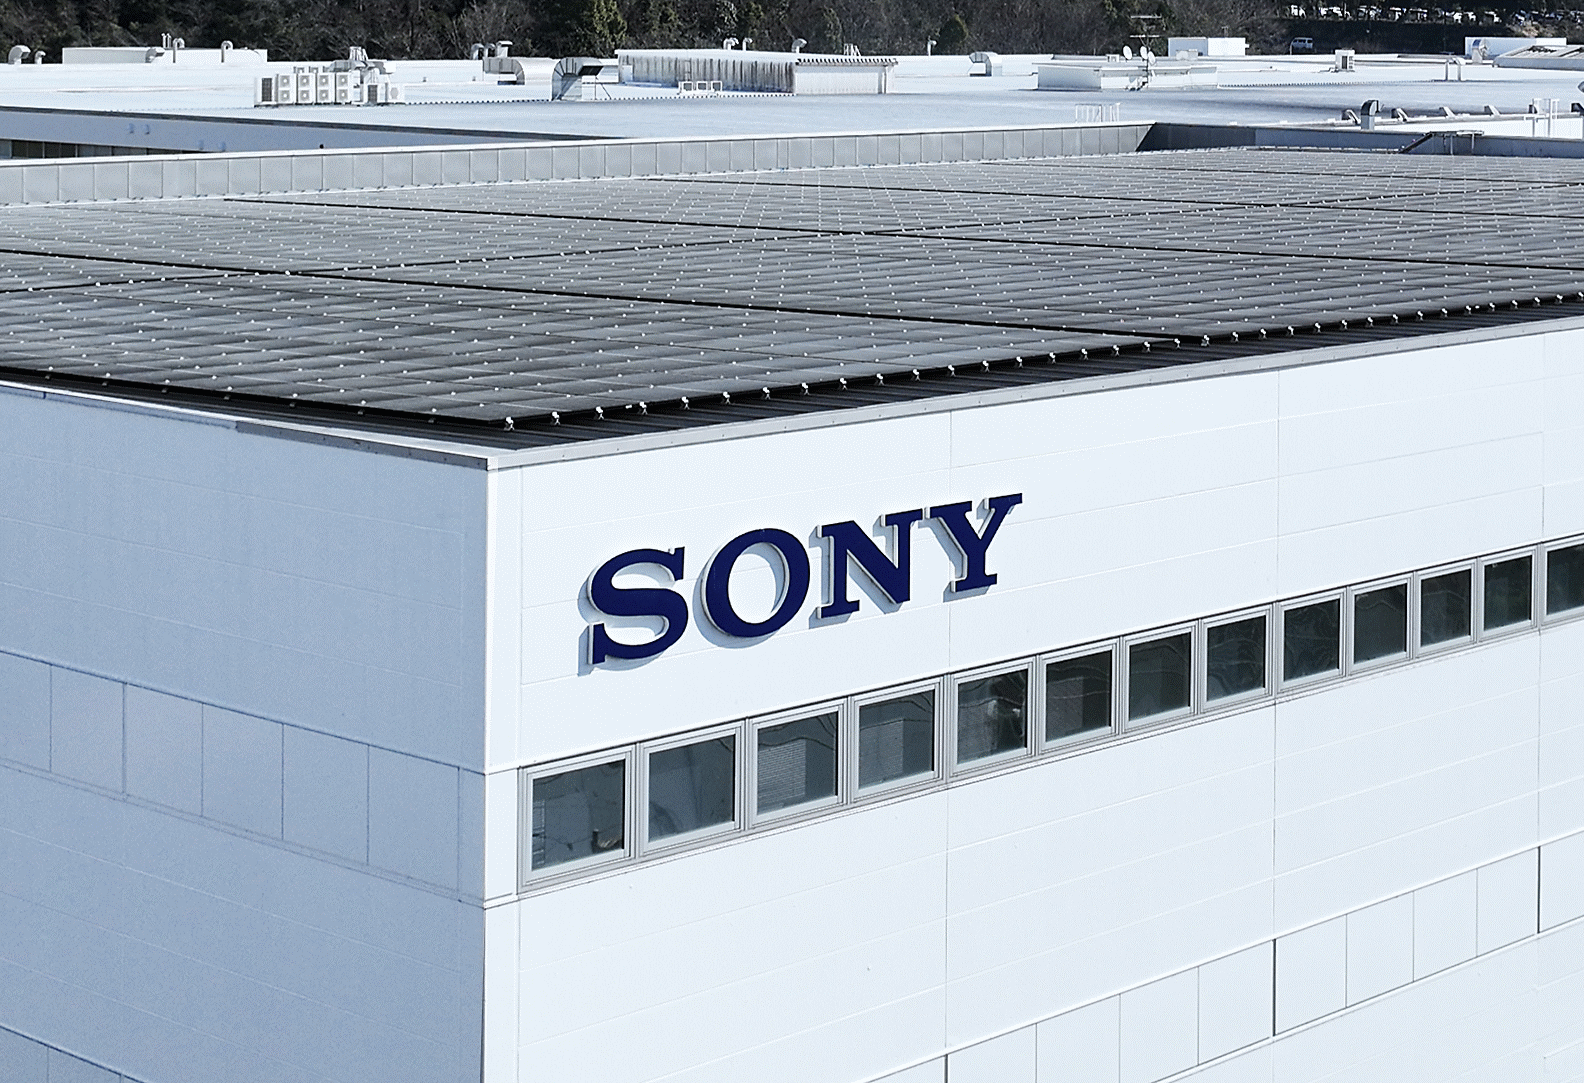 Photograph showing factory roof with solar panel and "SONY" logo